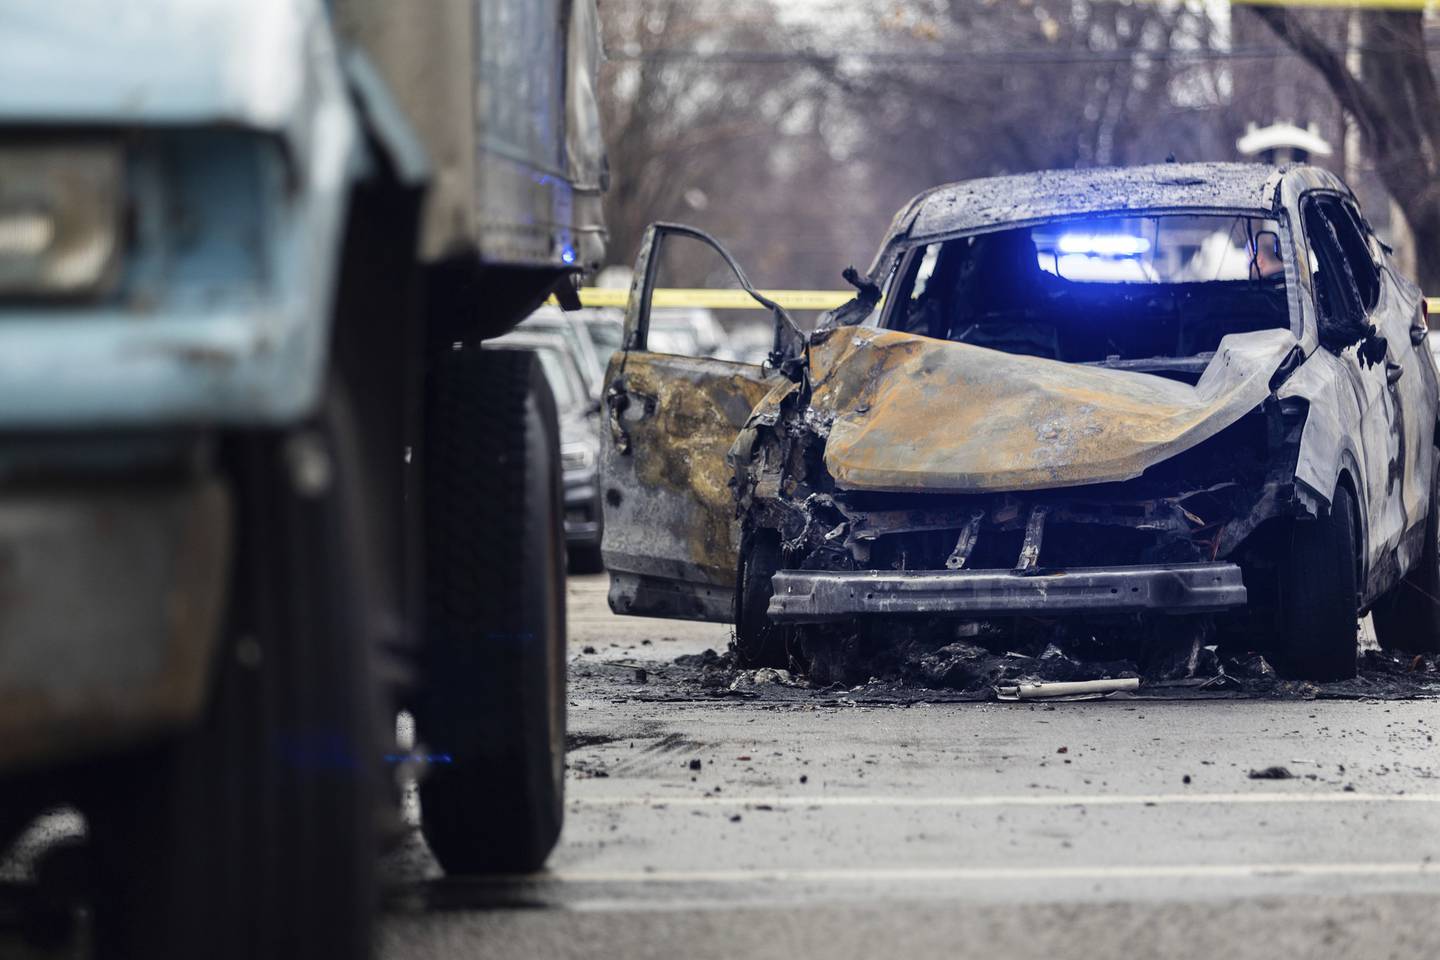 A police chase ended with suspects crashing into a Chicago Department of Streets and Sanitation truck at the corner of Oakley Avenue and Winona Street in the Ravenswood neighborhood of Chicago on Dec. 12, 2022. 